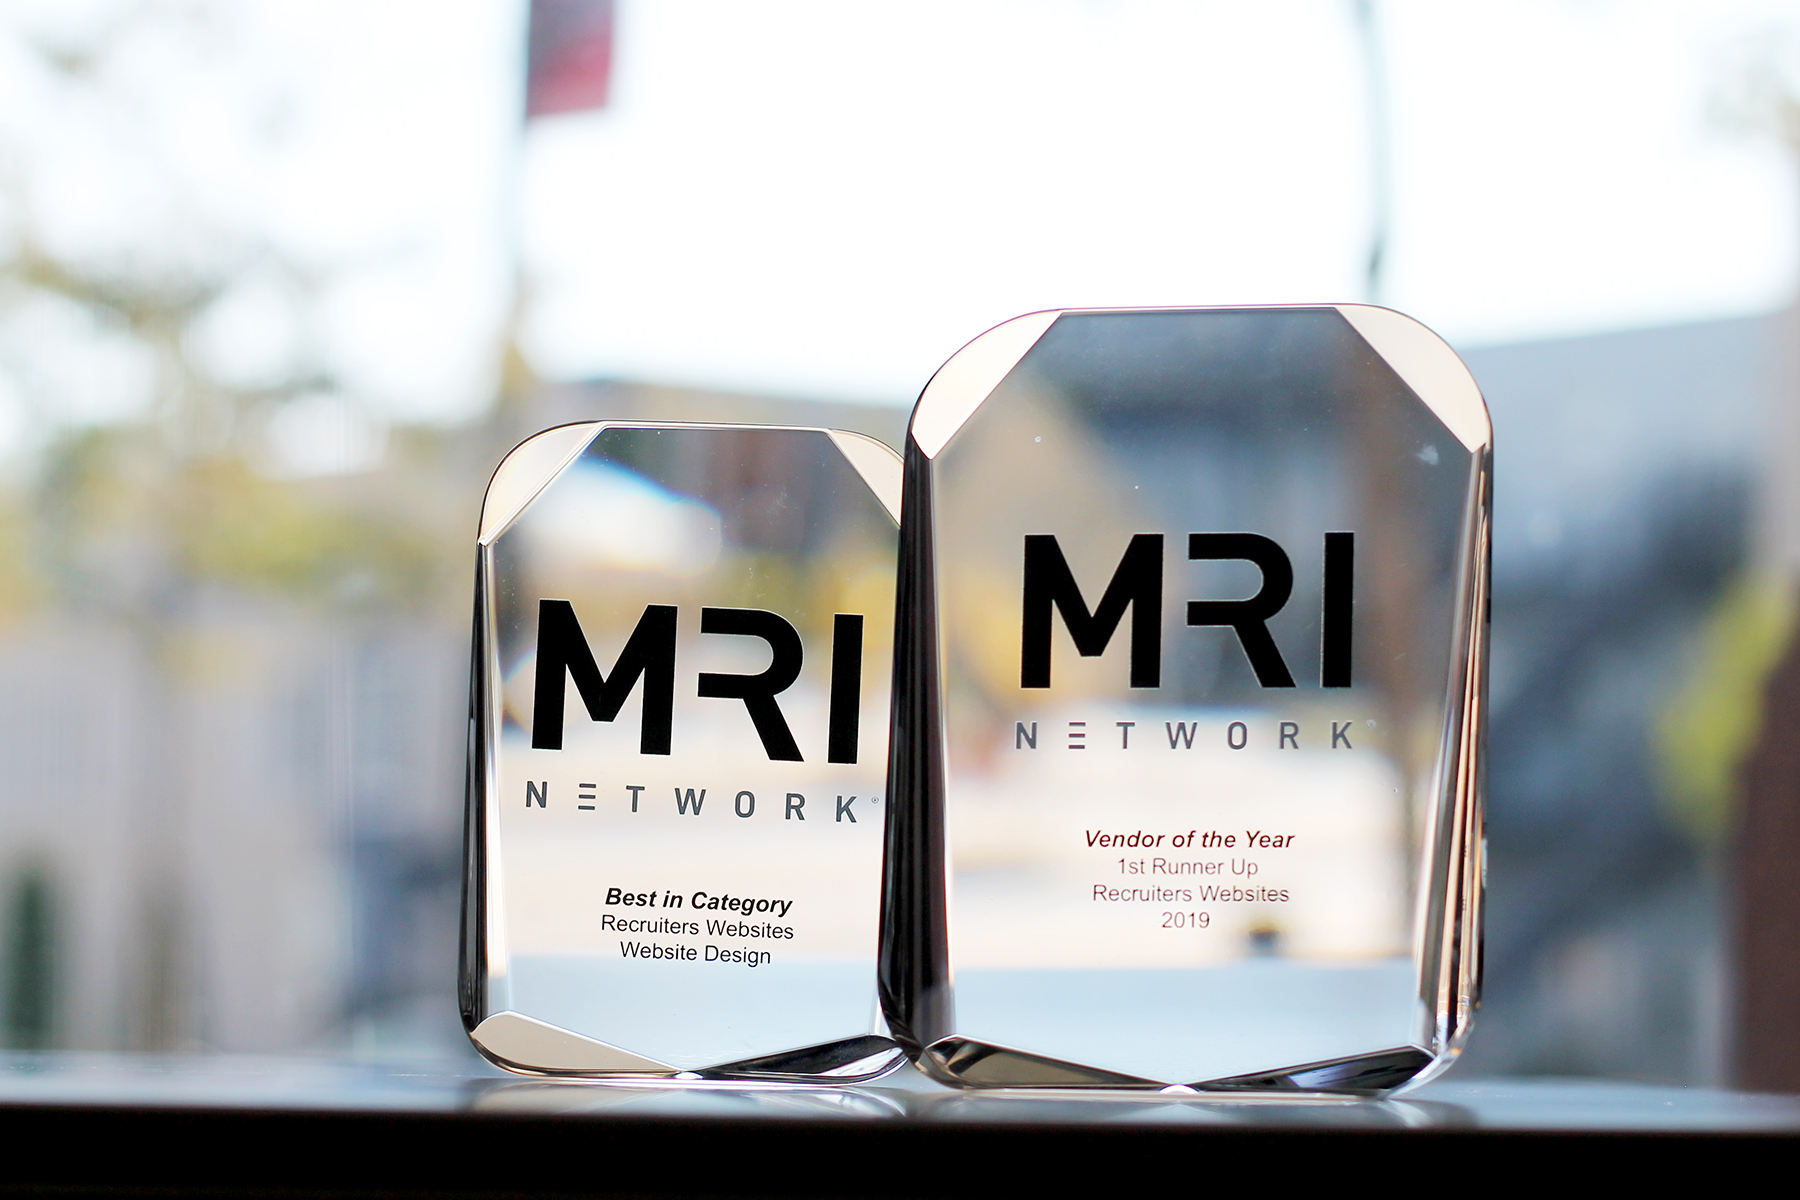 Recruiters Websites was named Best in Category for Website Design and first runner up for Vendor of the Year at the 2019 MRINetwork United global conference in Orlando in September.